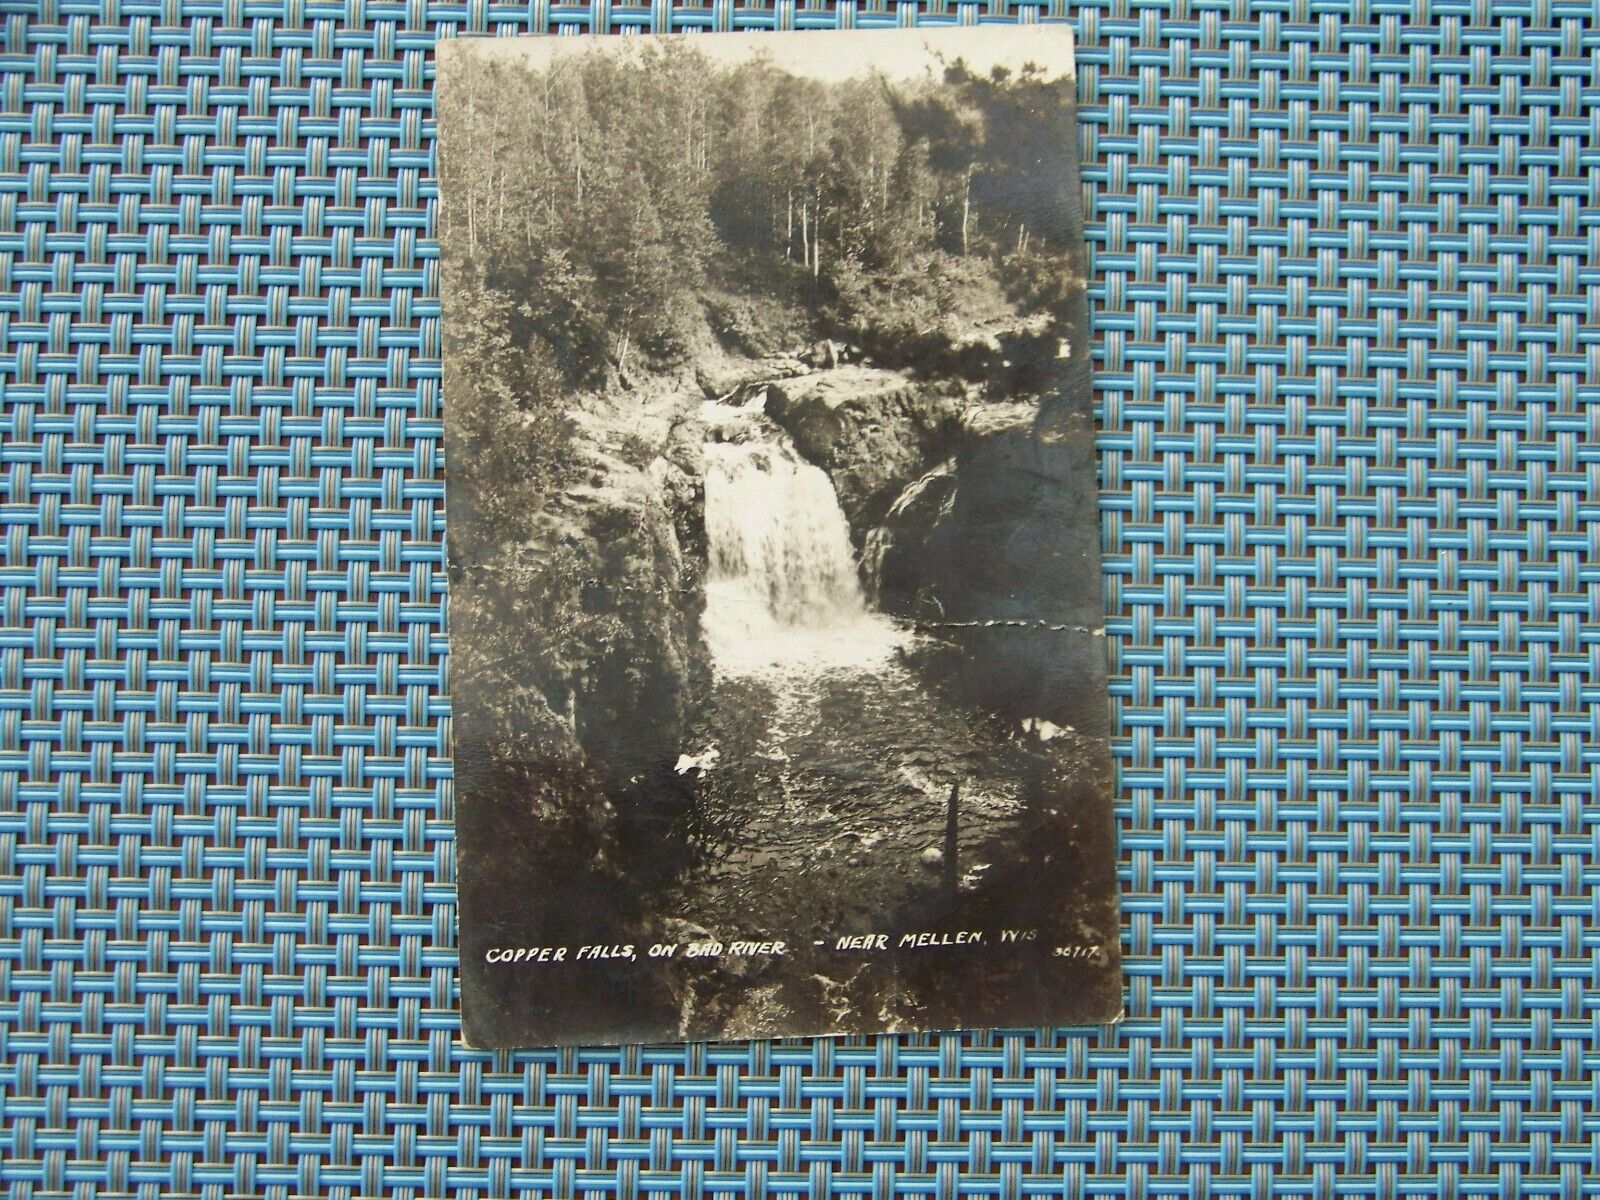 Mellen Wisconsin WI RPPC Real Photo Copper Falls on Bad River